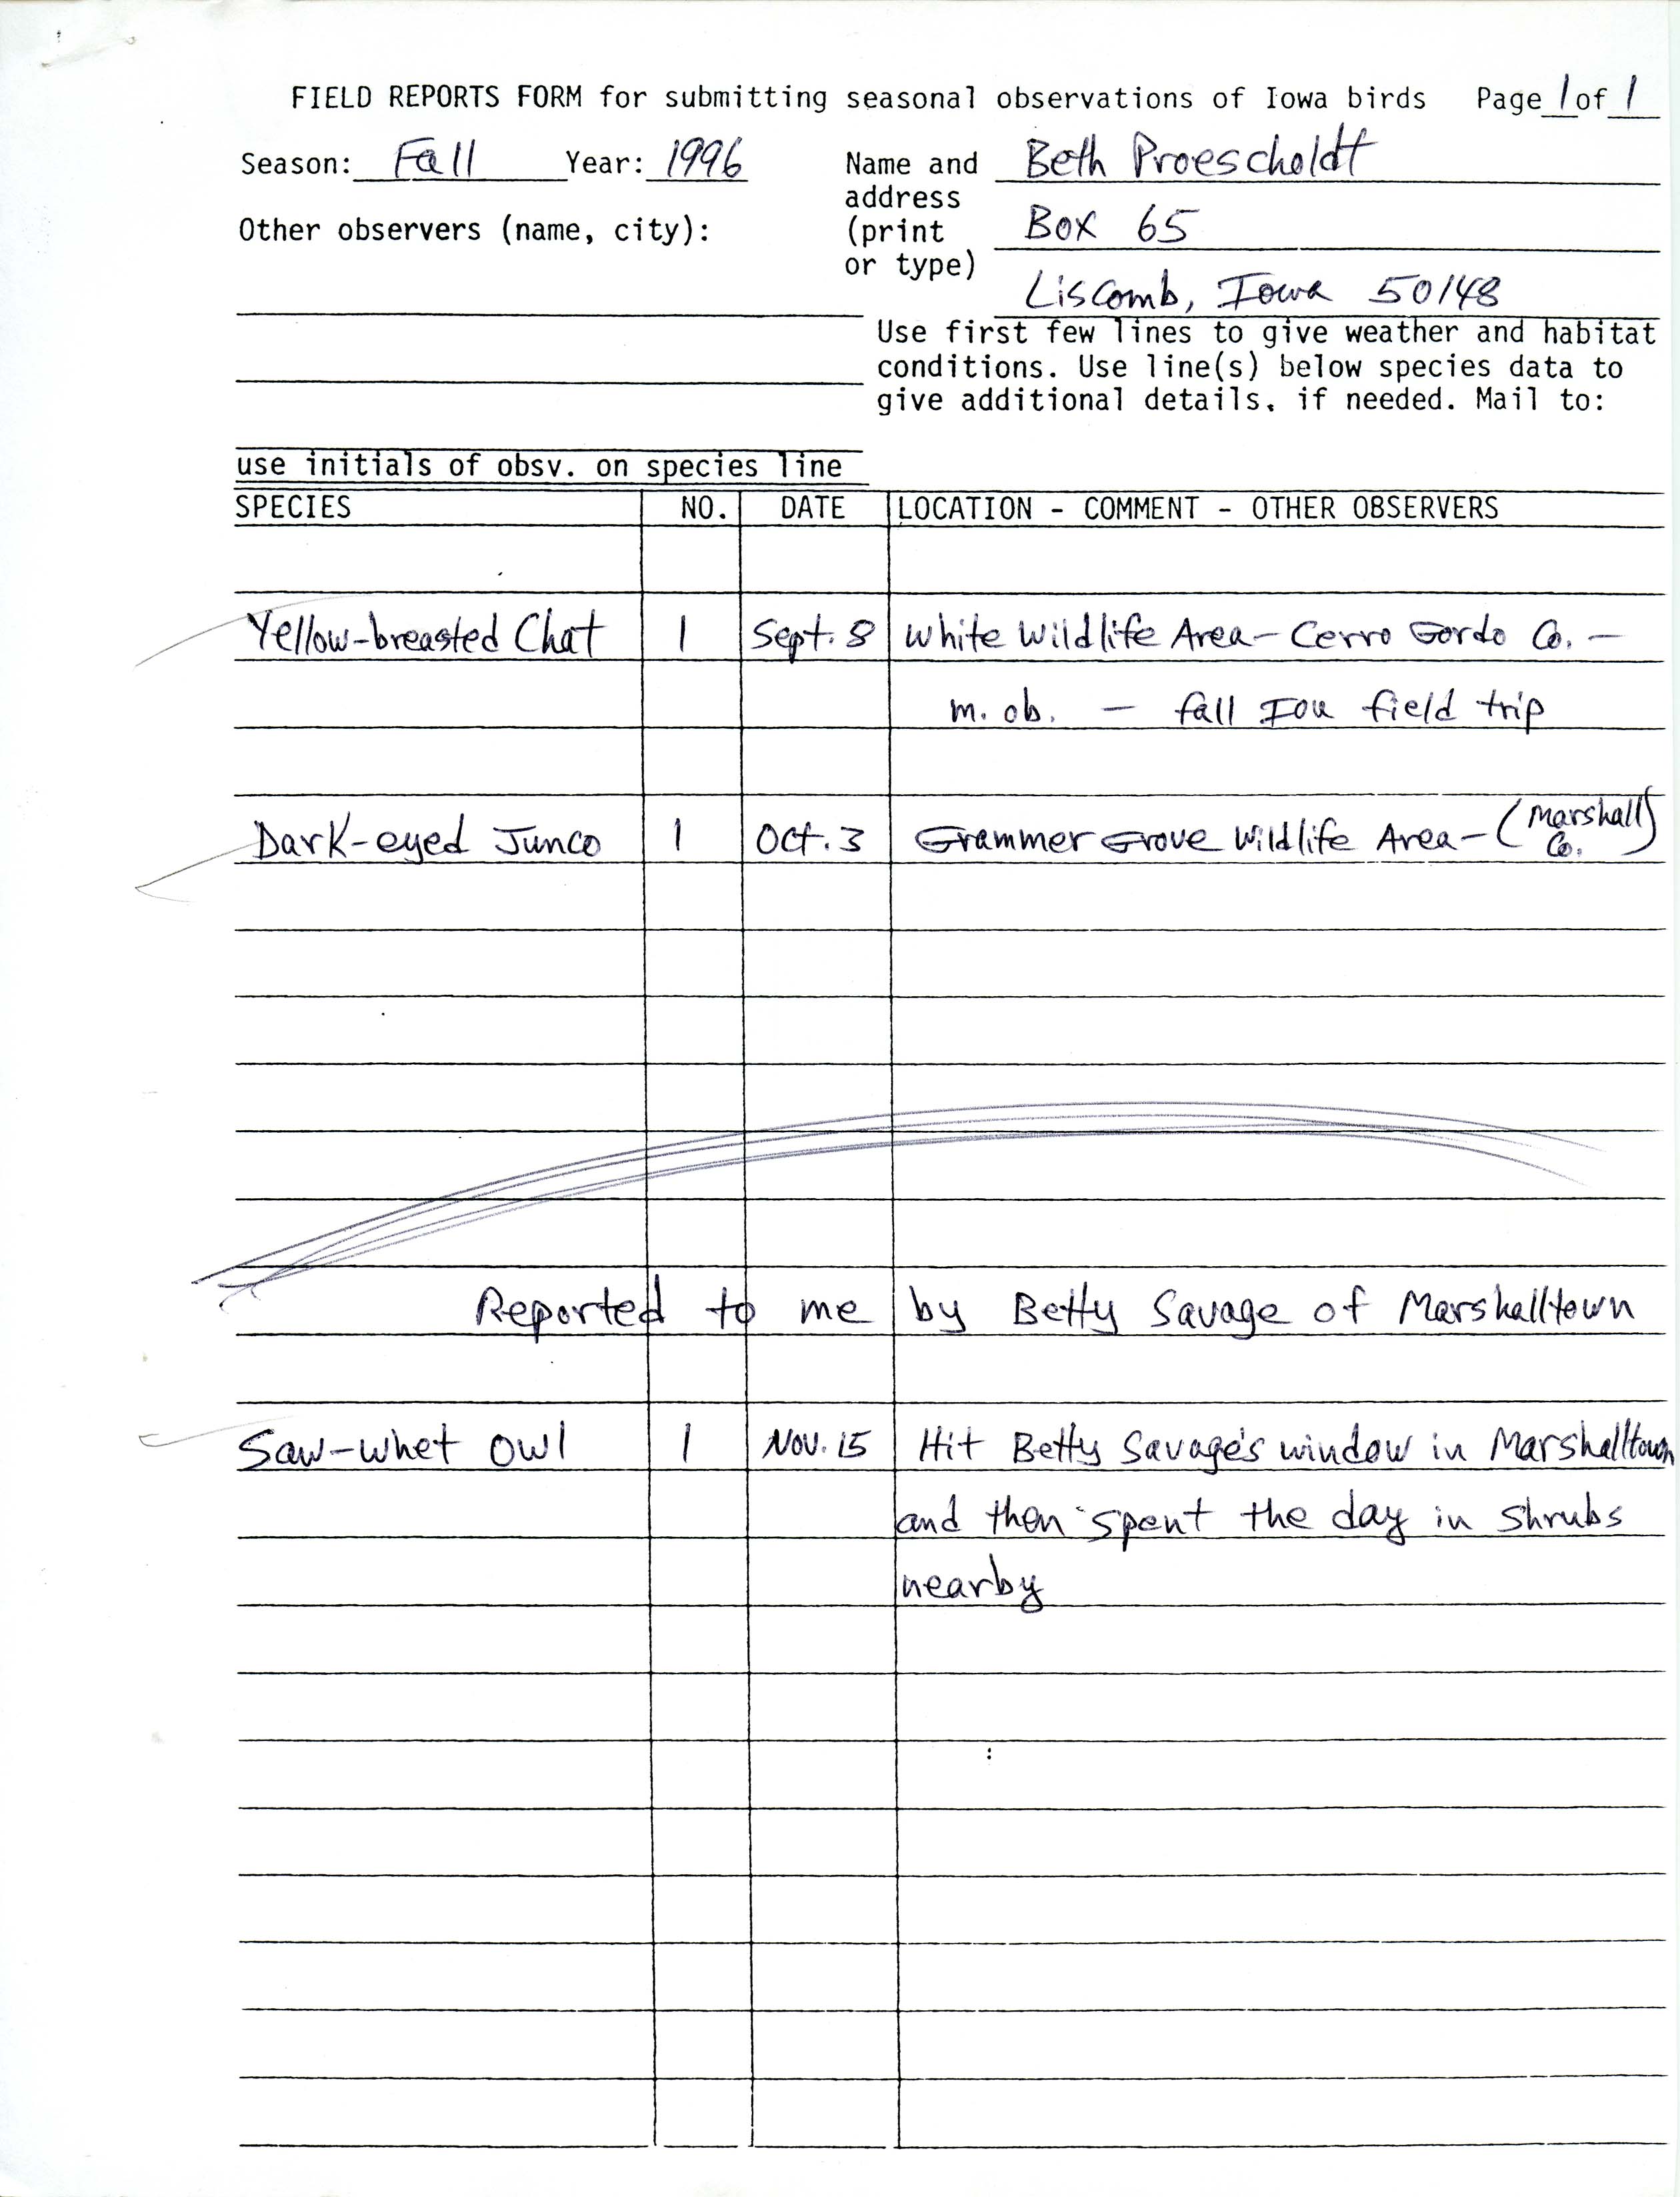 Field notes and Hawk watch report contributed by Beth Proescholdt, fall 1996